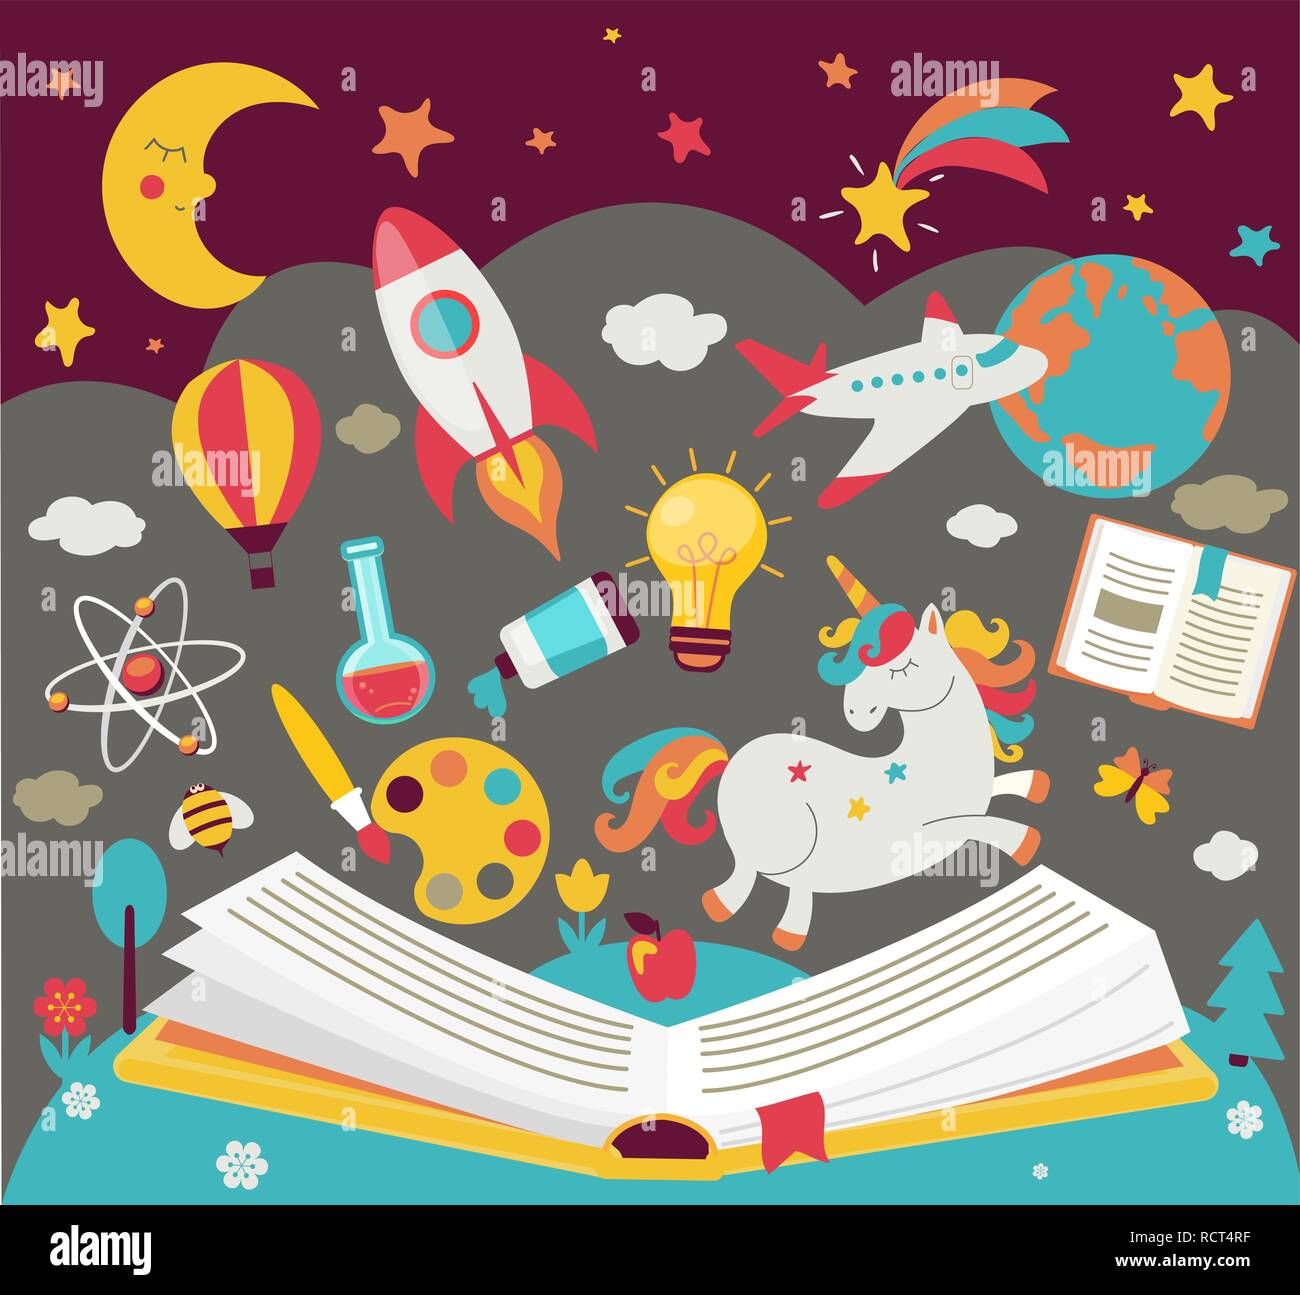 Concept of kids dreams while reading the book. hildrens imagination makes fairy tales real. Open book with many fabulous elements. Vector illustration in flat style. Stock Vector